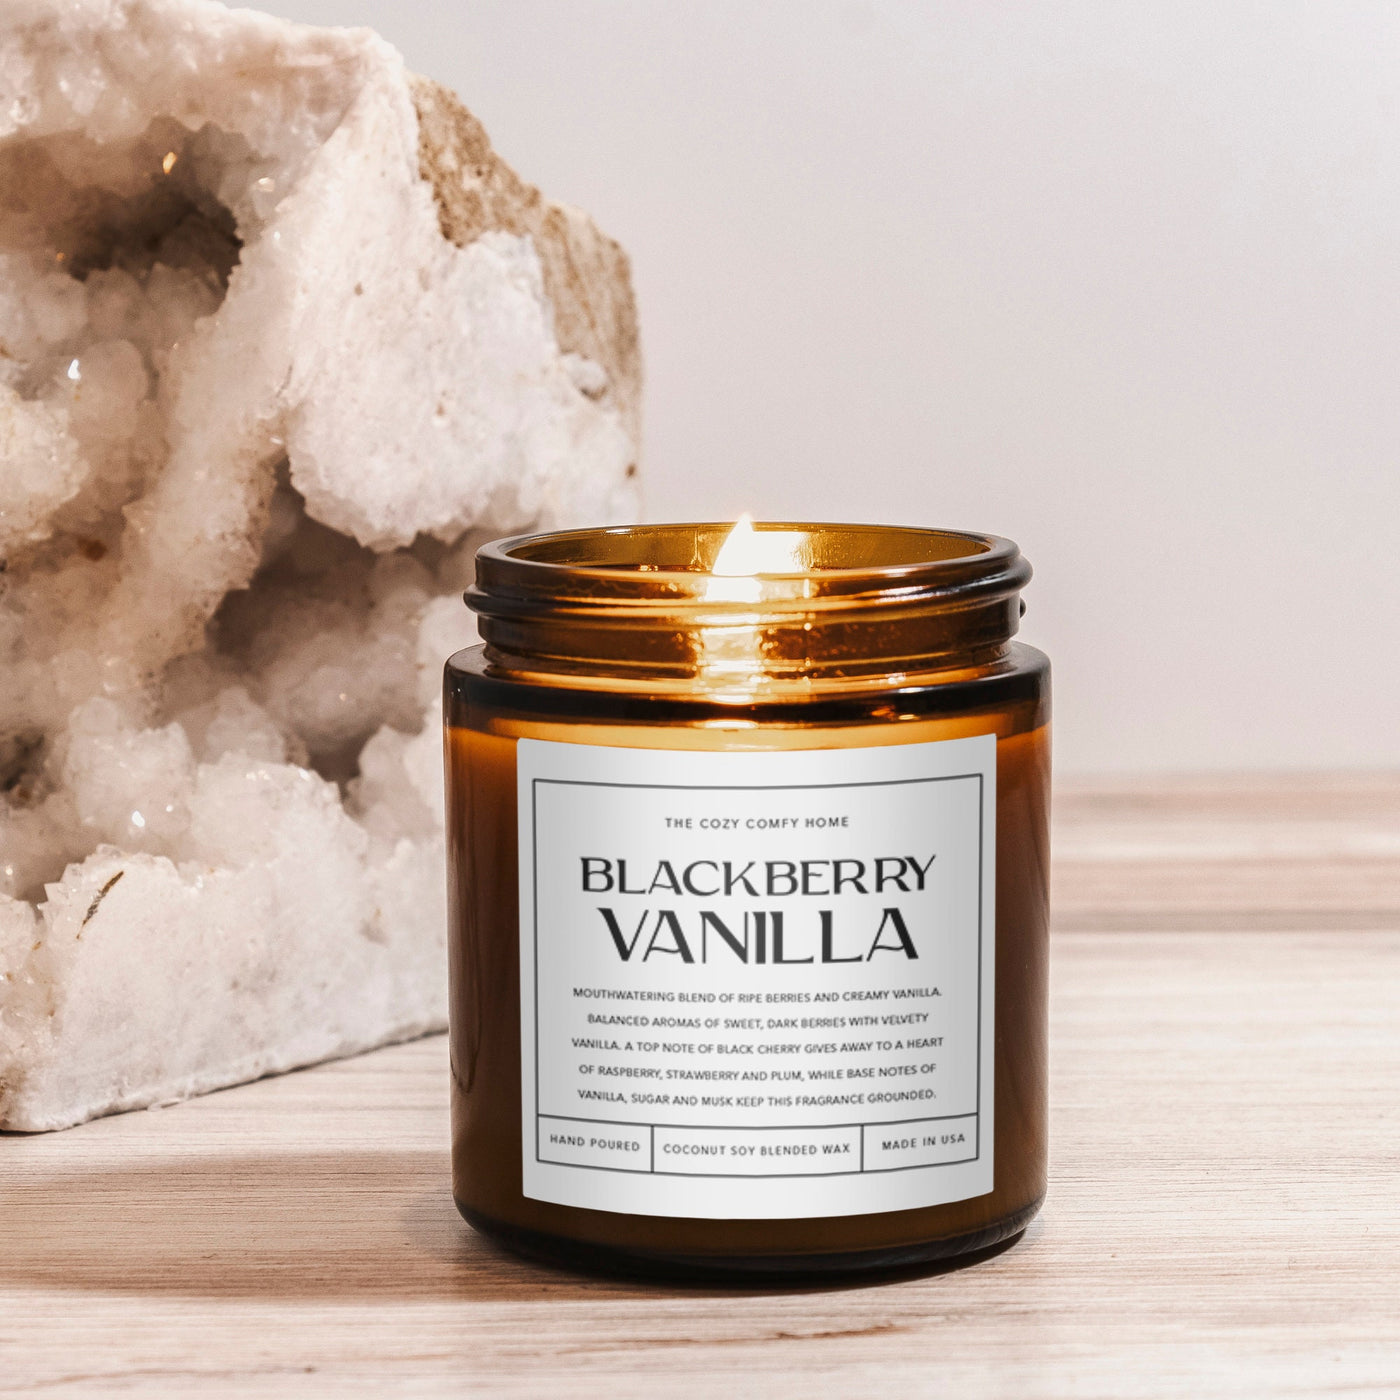 Blackberry Vanilla hand poured candle, Scented Candle, Coconut soy wax candle, Vegan candle, Gift for her, Gift For mom, Gift for Sister